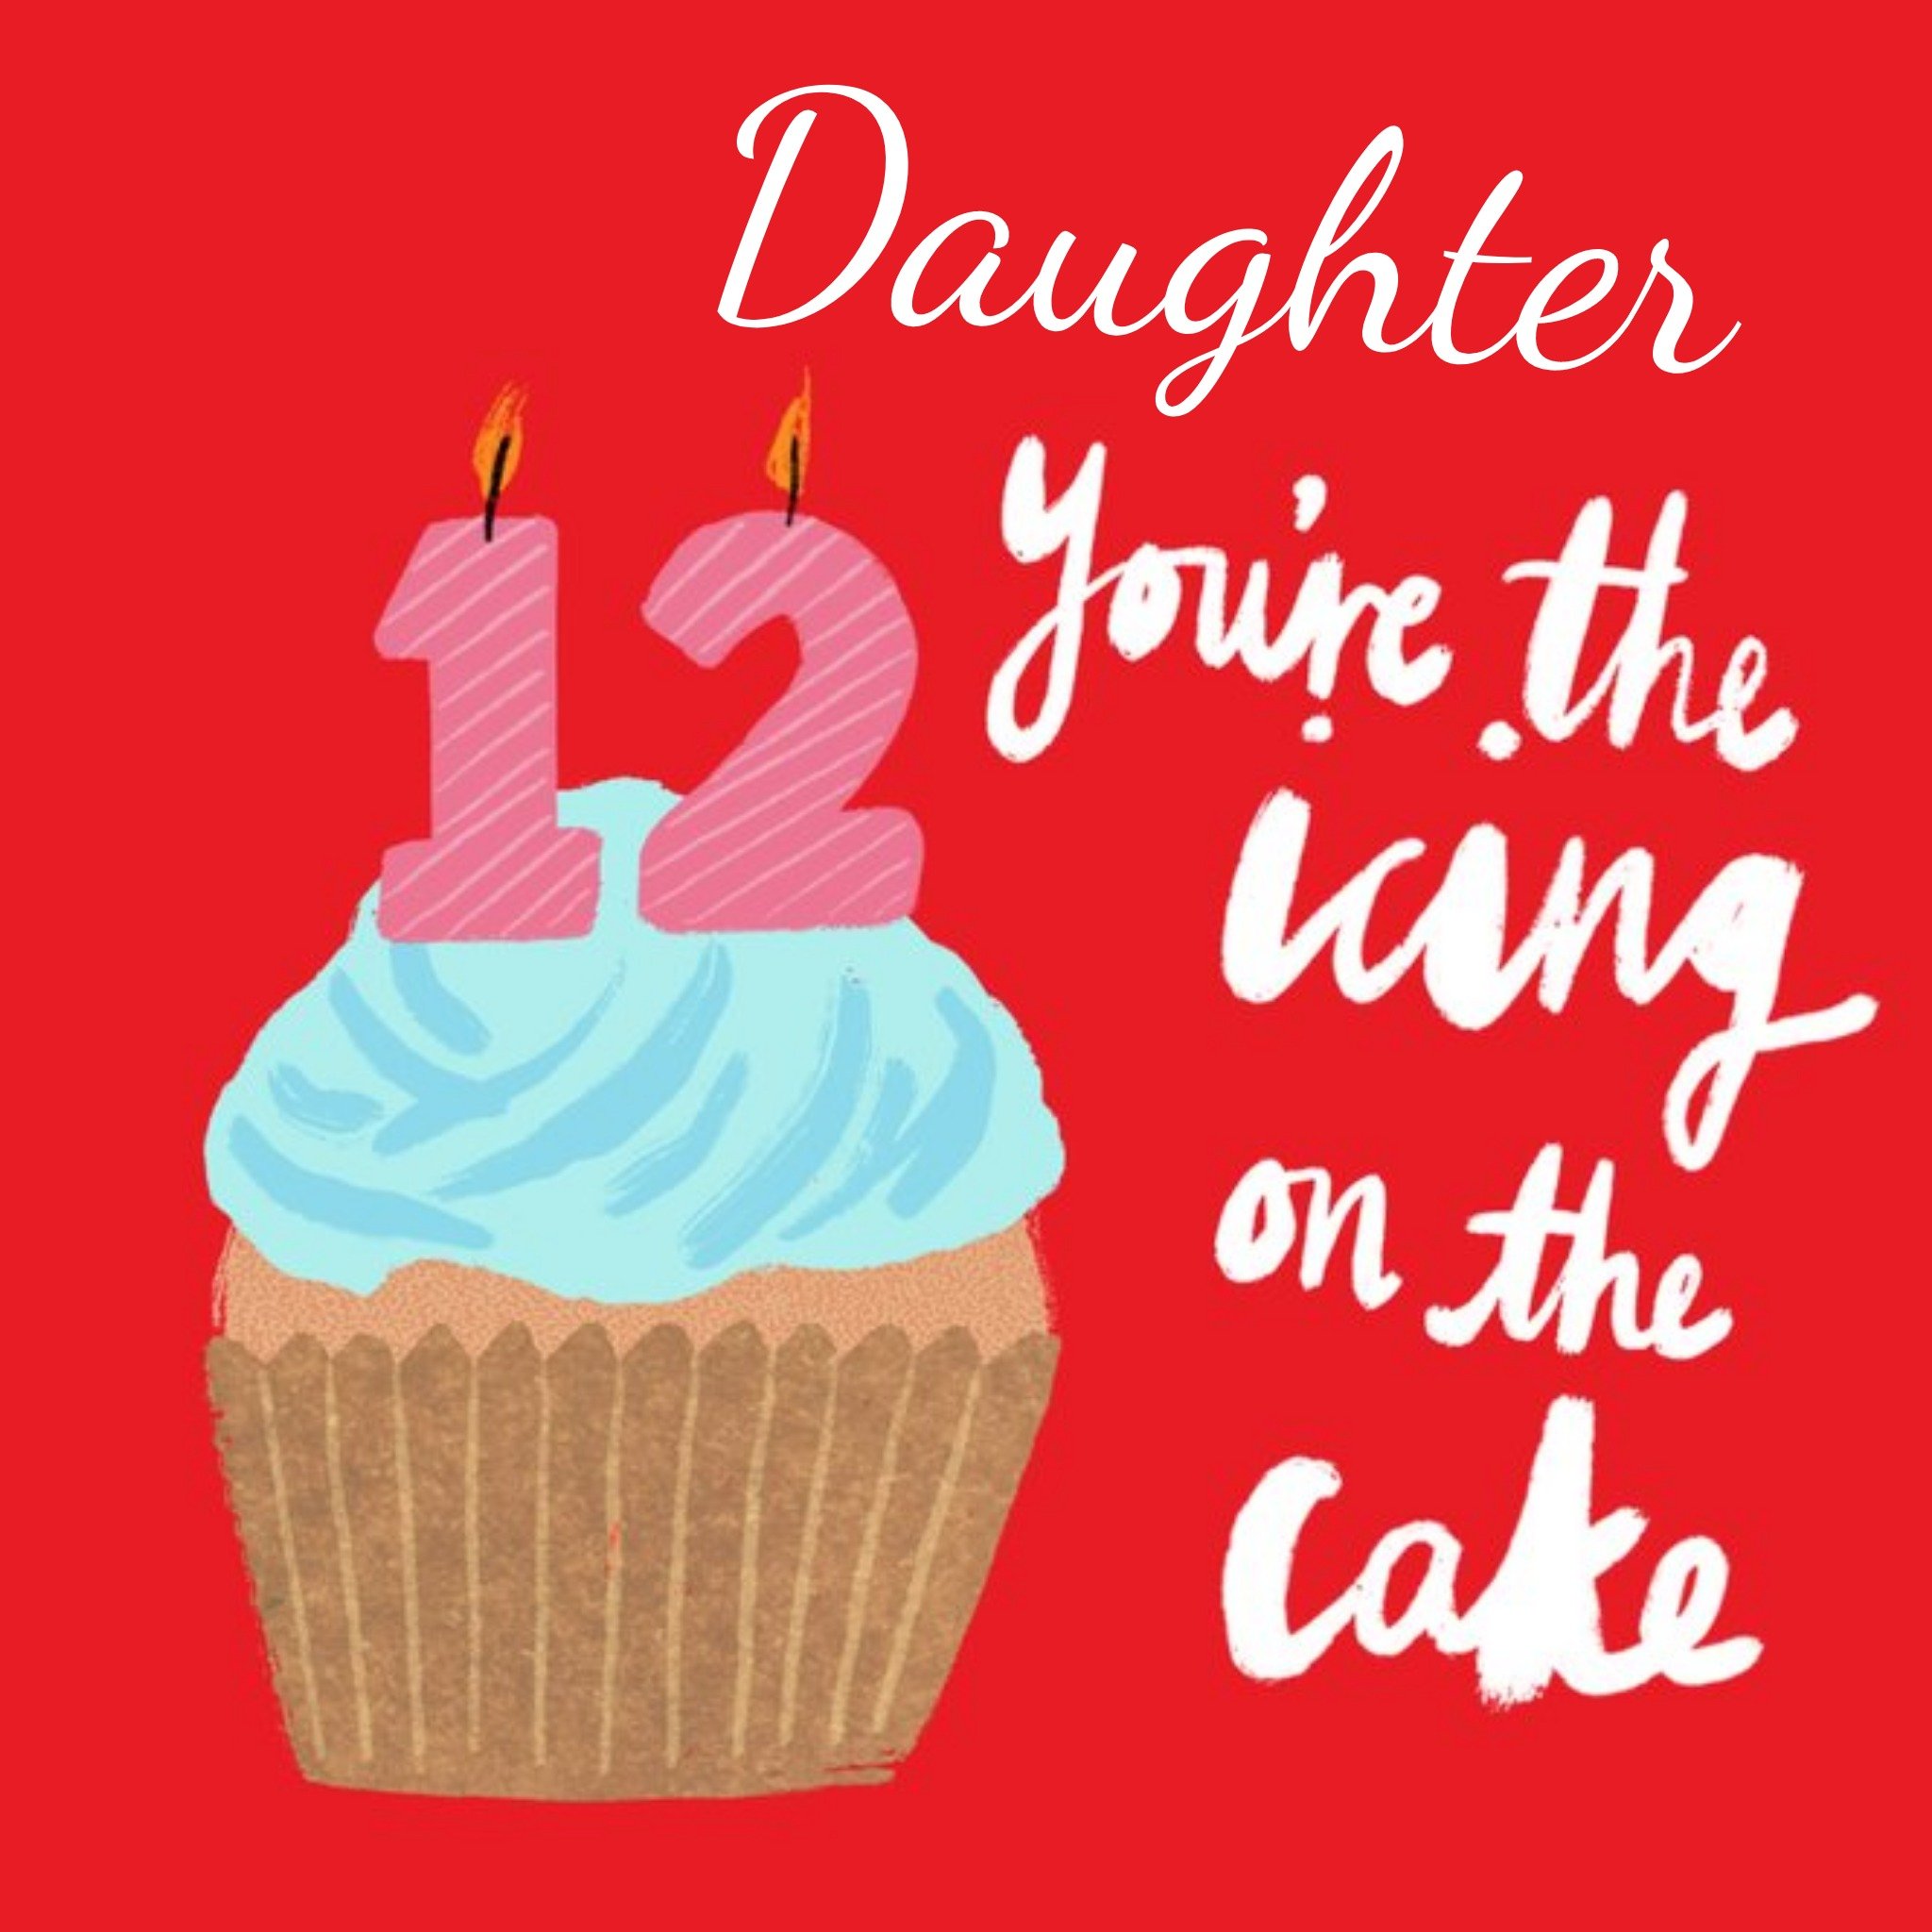 Moonpig Typographic 12 Your The Icing On The Cake Birthday Card, Square